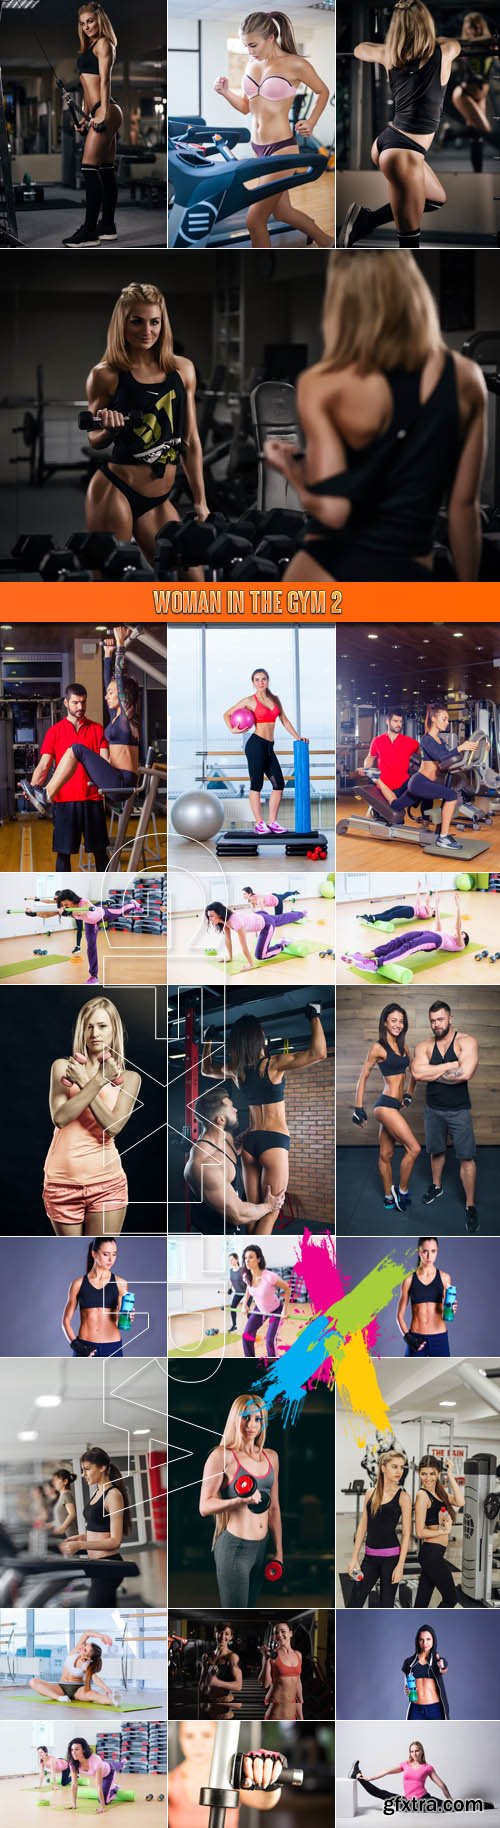 Woman in the gym 2 - Stock Photos